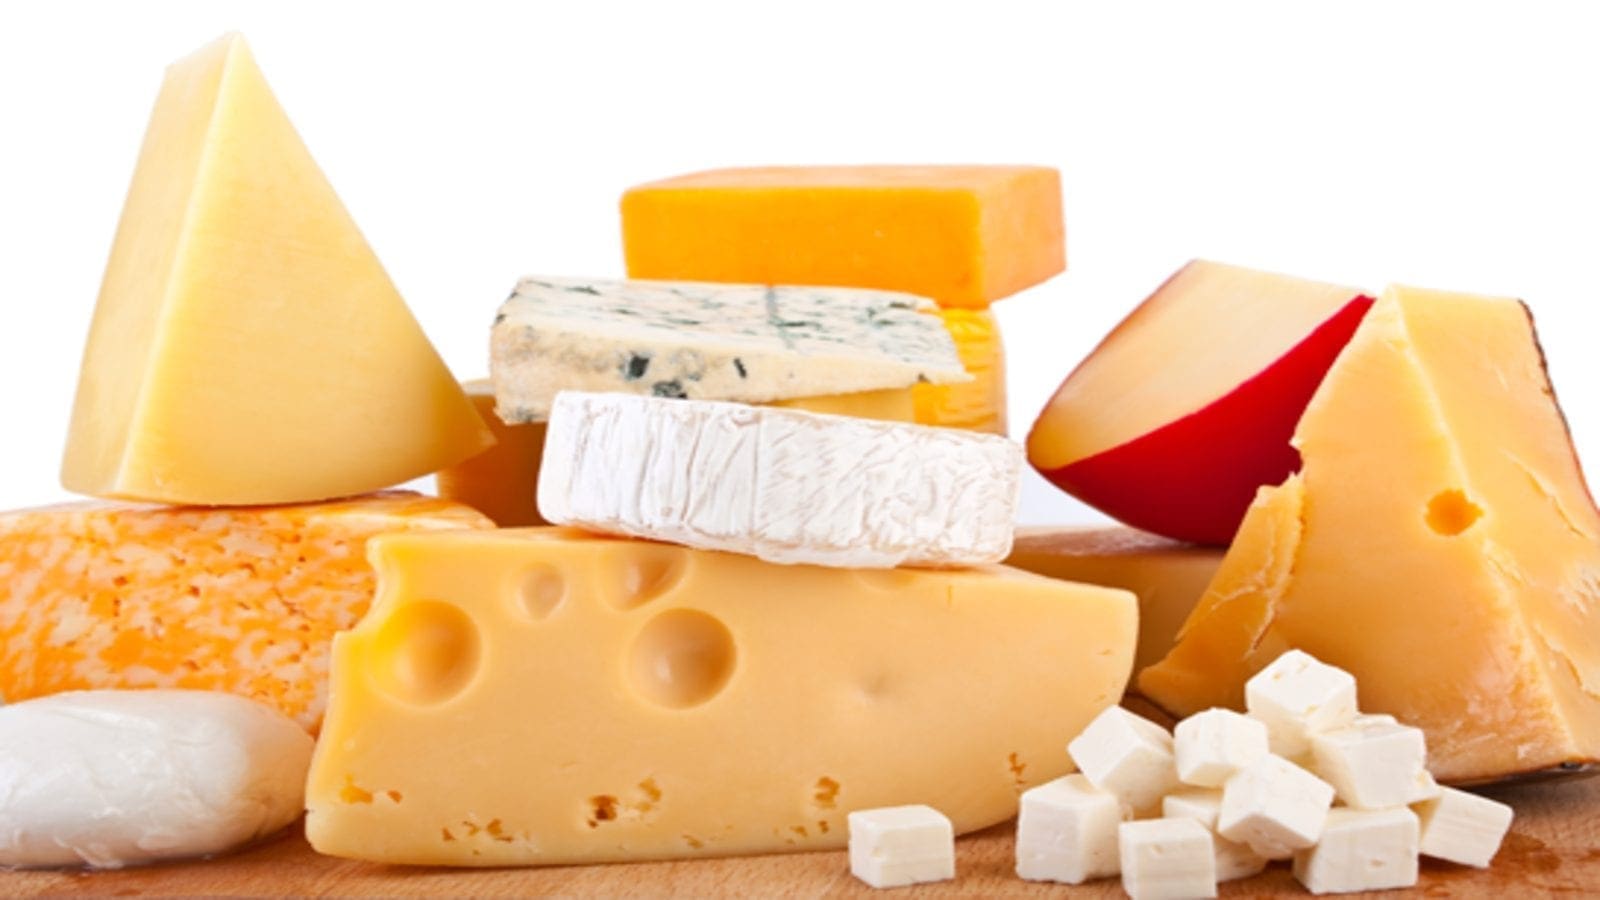 Leprino Foods to acquire sole ownership of Glanbia cheese for US$170.4M